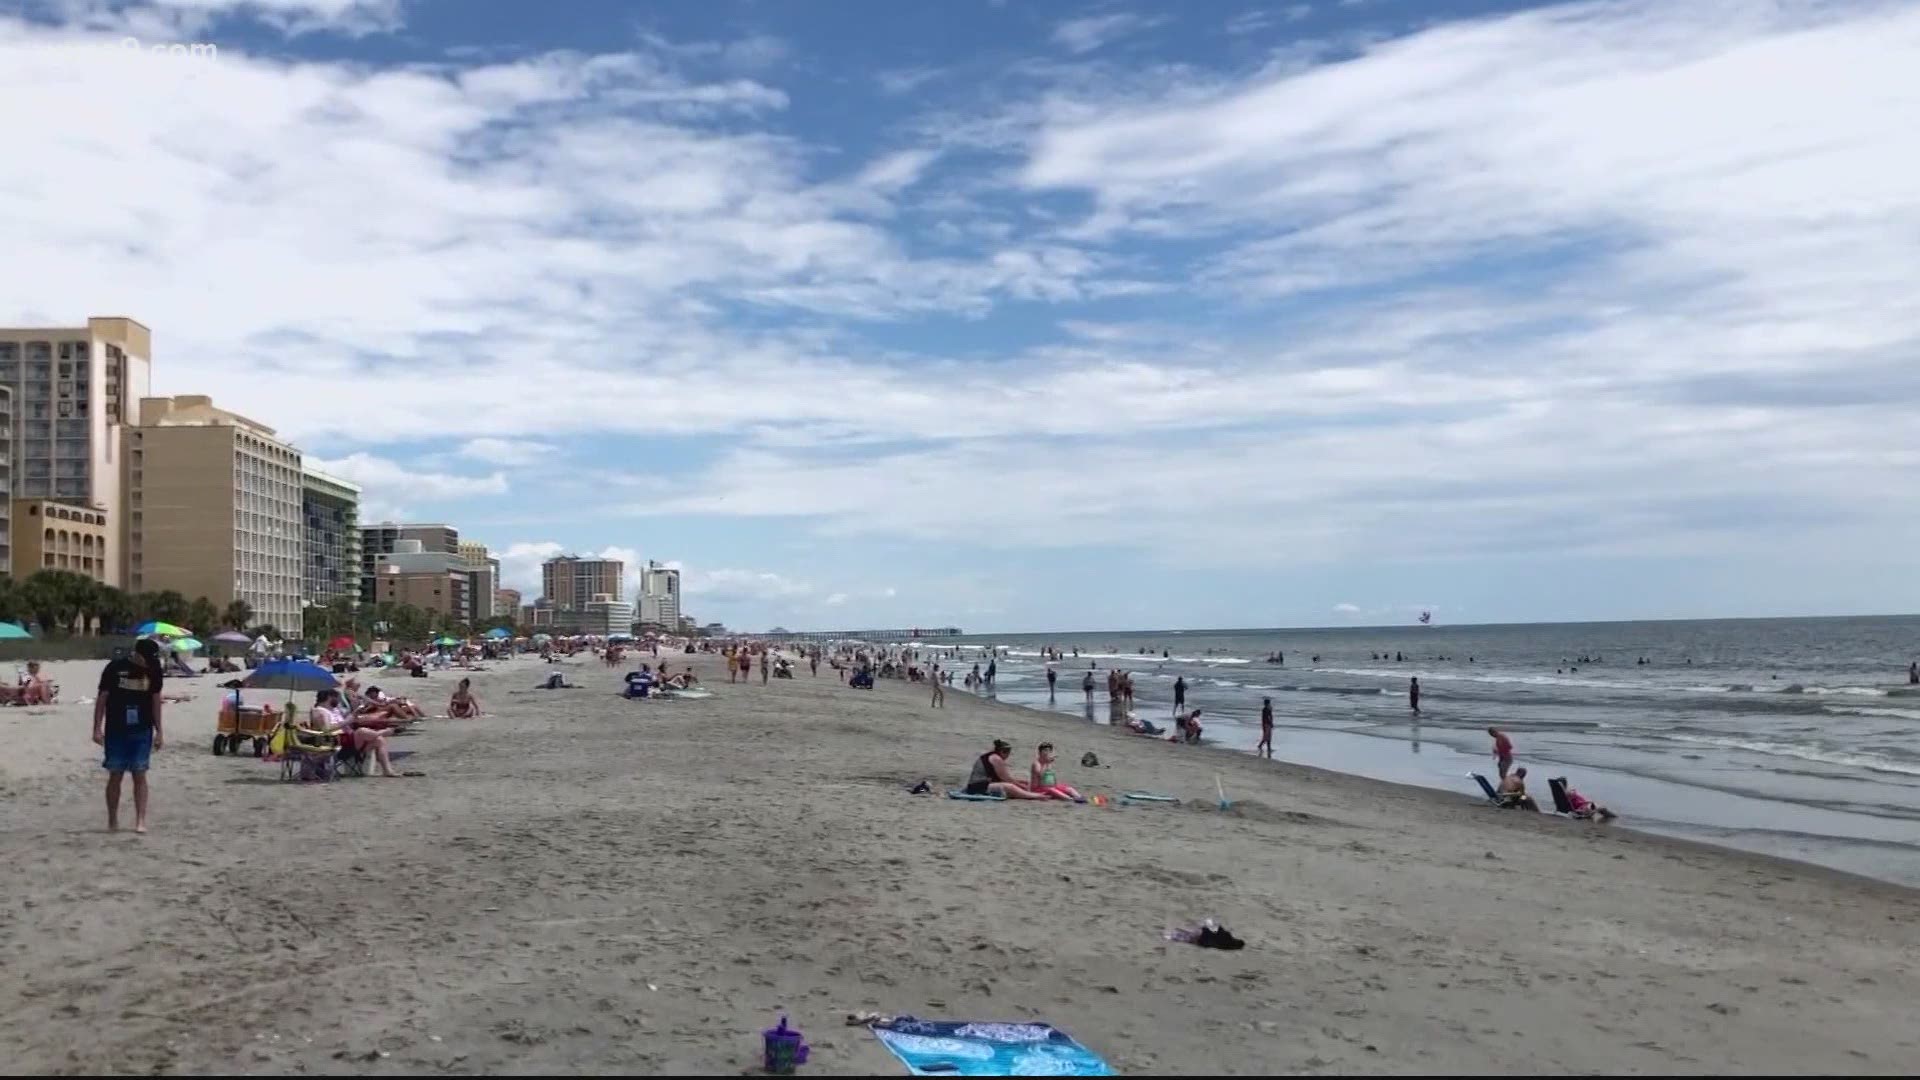 Roughly 100 people in Loudoun County, mostly young, have been infected with COVID-19 following recent trips to Myrtle Beach said Loudoun's health director.